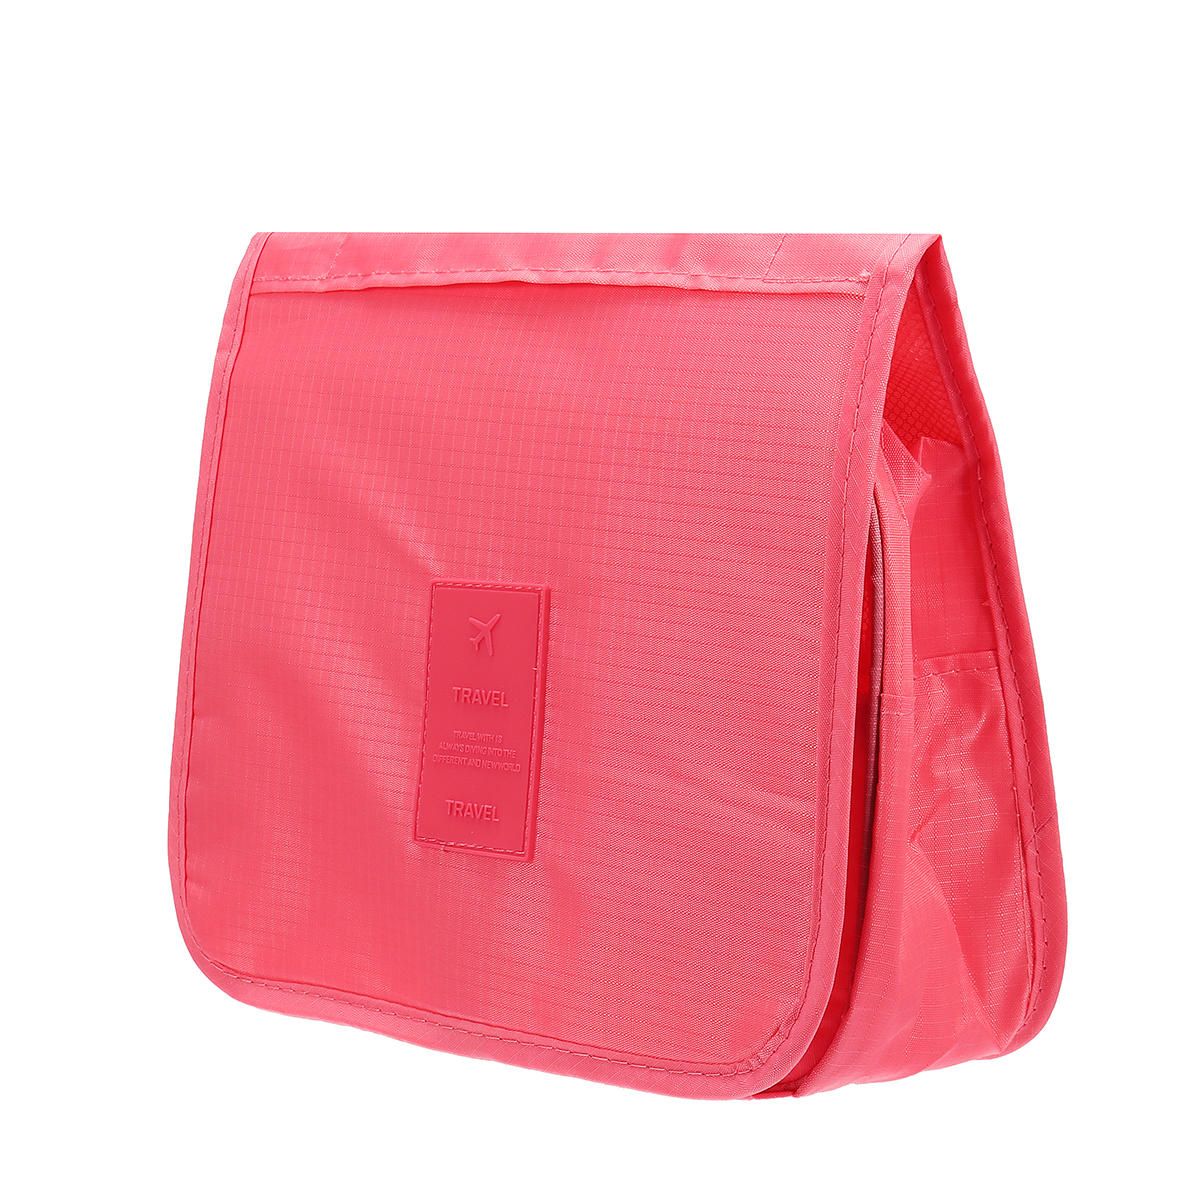 Solid-Color-Foldable-Travel-Bag-for-Toiletries-Hanging-Toiletry-Bag-Portable-Finishing-Cosmetic-Bag-1463909